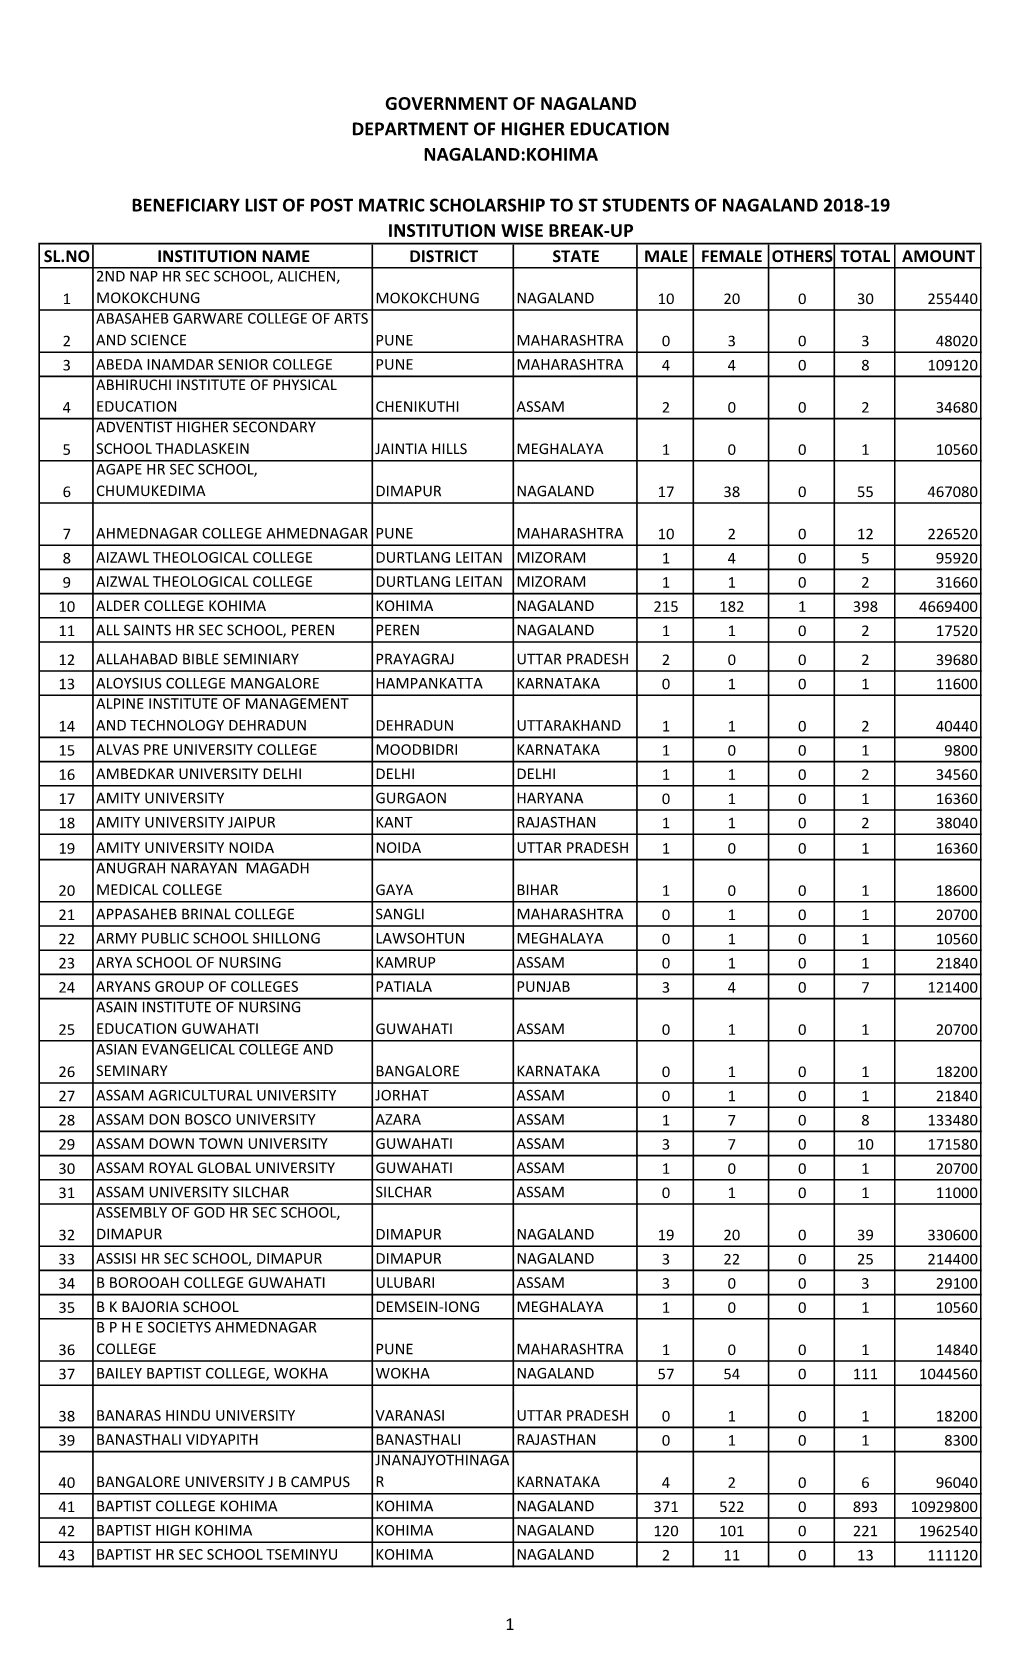 Institution Wise Break-Up Government of Nagaland Department of Higher Education Nagaland:Kohima Beneficiary List of Post Matric